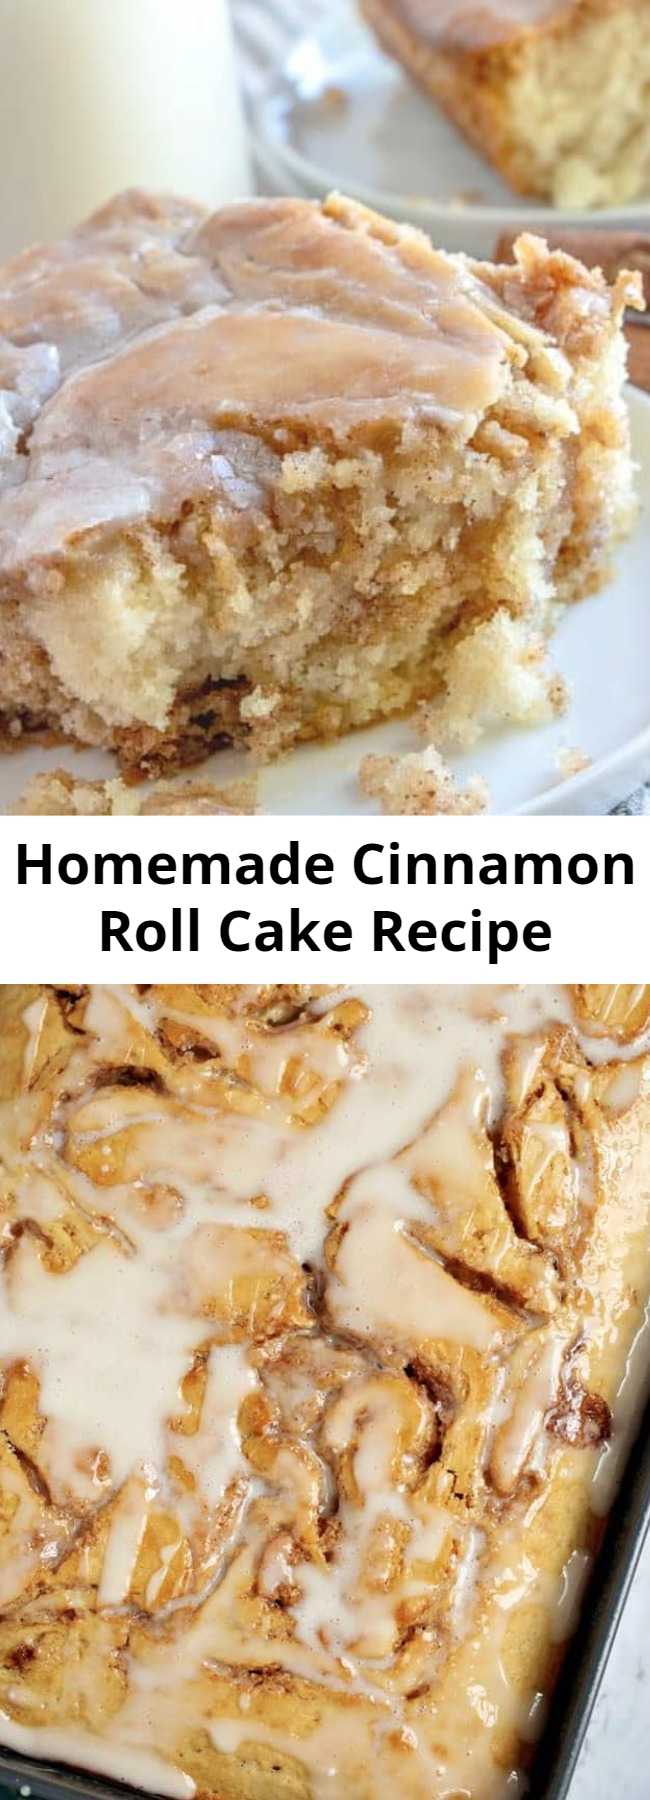 Homemade Cinnamon Roll Cake Recipe - This Homemade Cinnamon Roll Cake dessert has all the flavor of a cinnamon roll but in an easy cake with a vanilla icing drizzled on top! #homemadecakes #cinnamonrolls